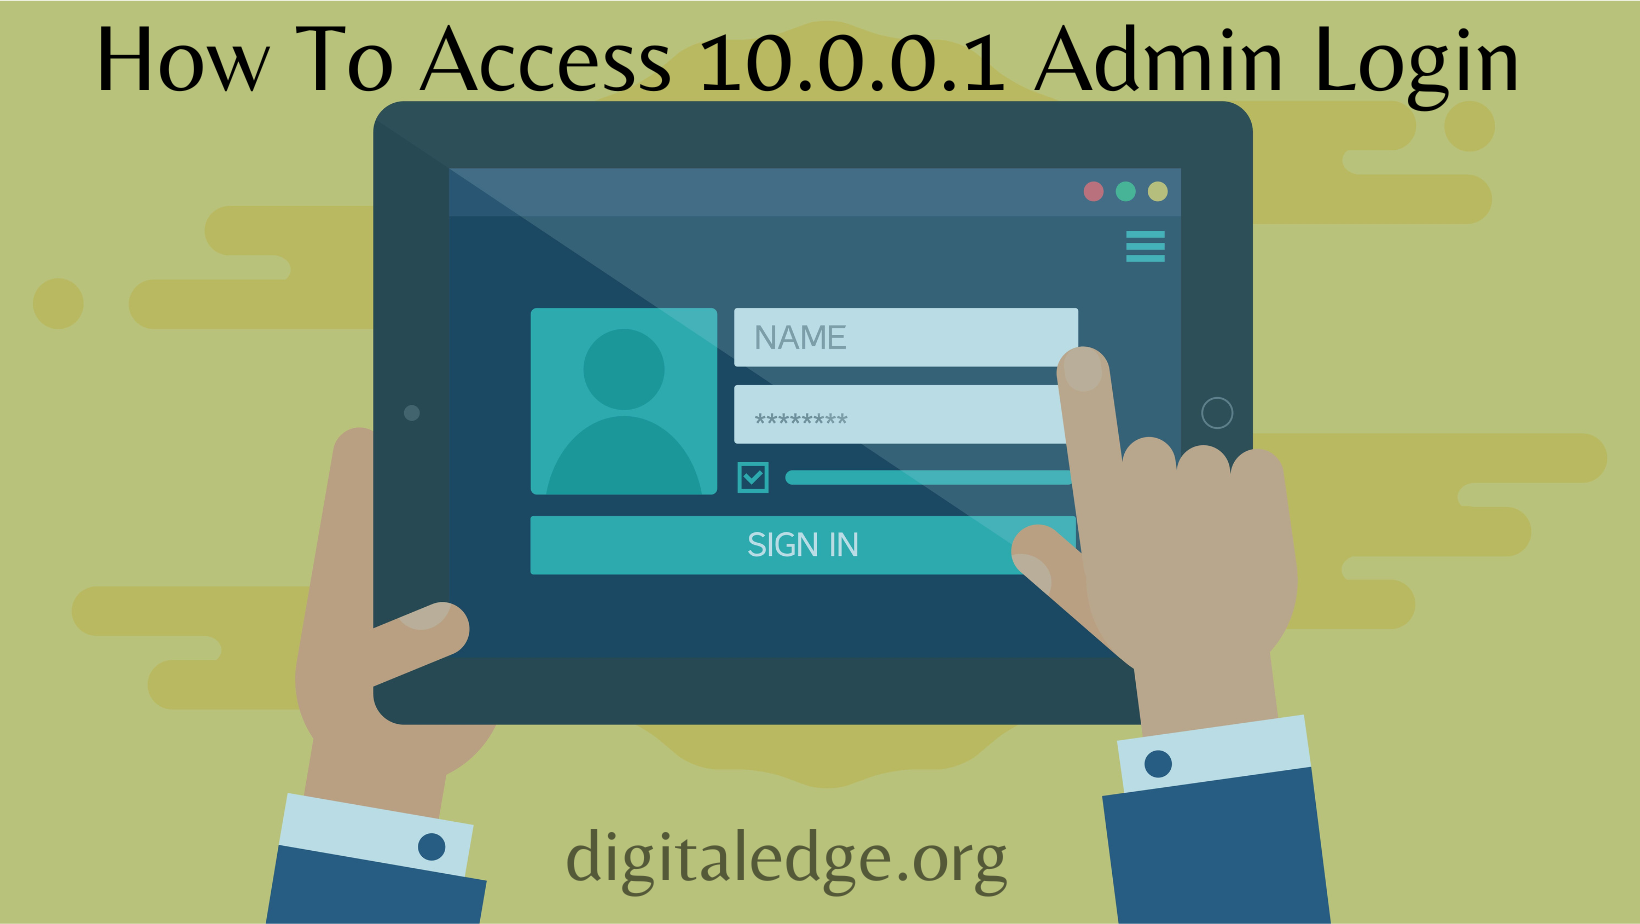 How To Access 10.0.0.1 Admin Login (1)